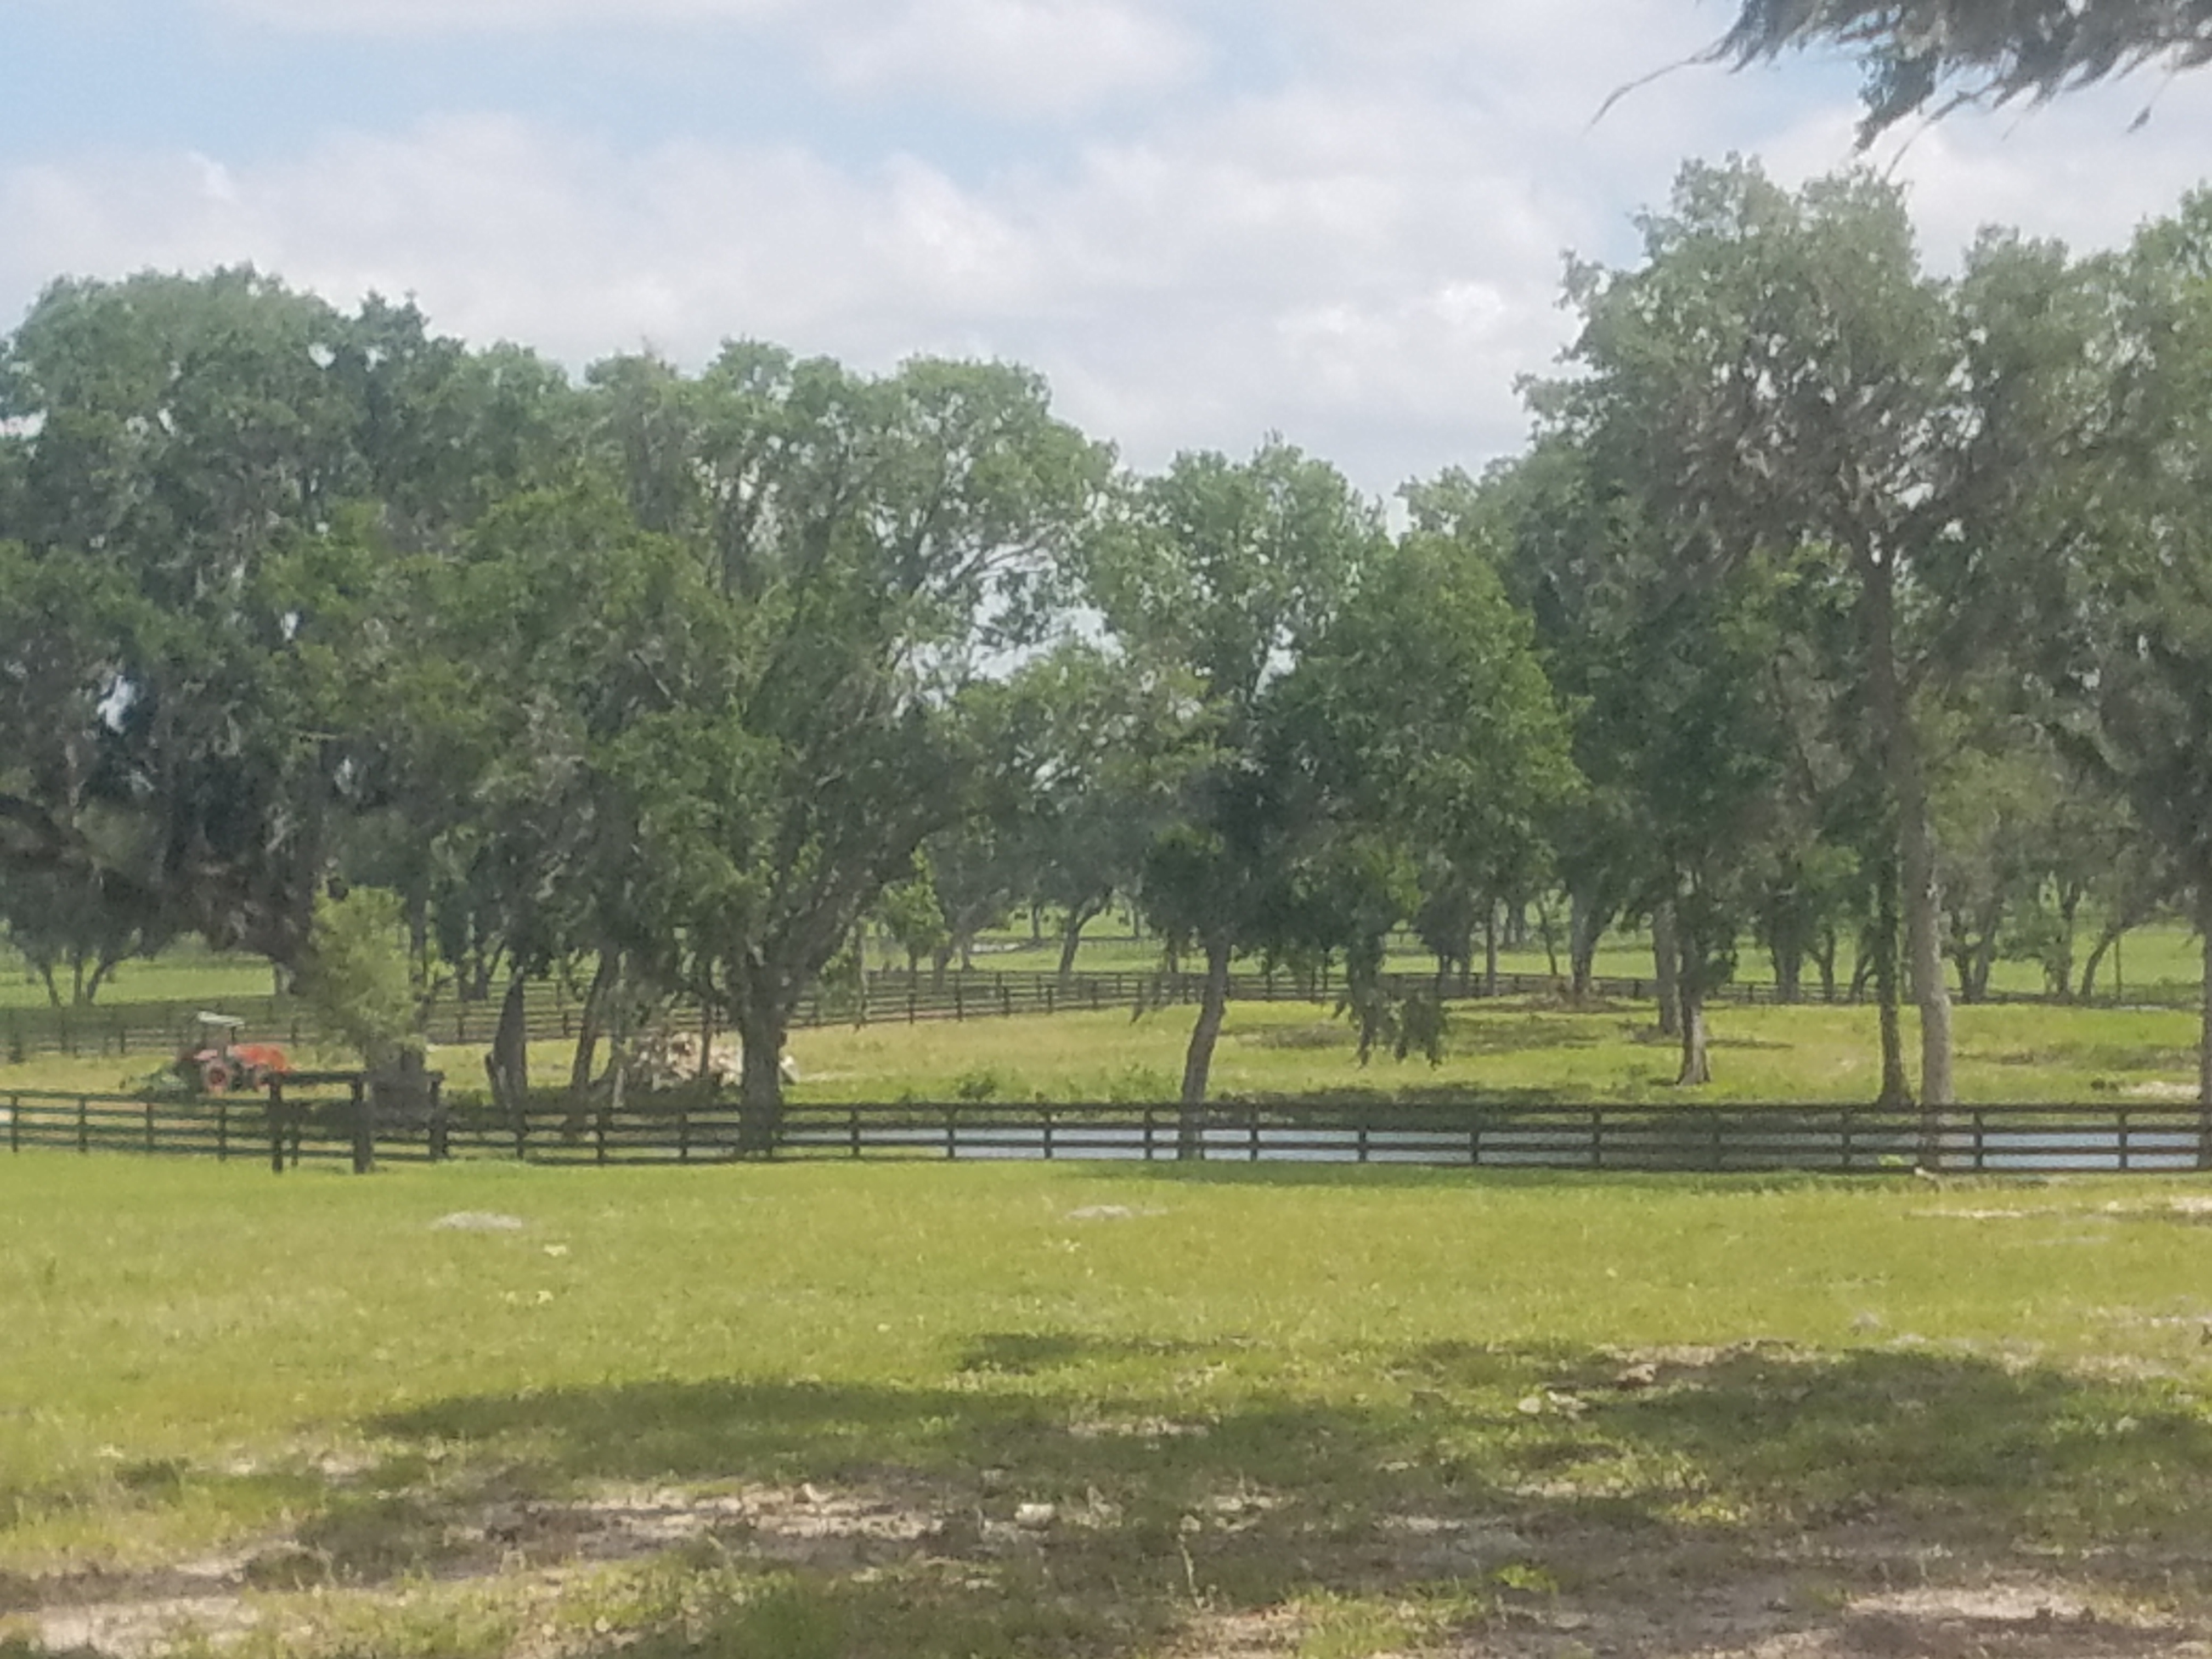 premier horse boarding facility located in the heart of Northwest Ocala. Just minutes from the World Equestrian Center and HITS!